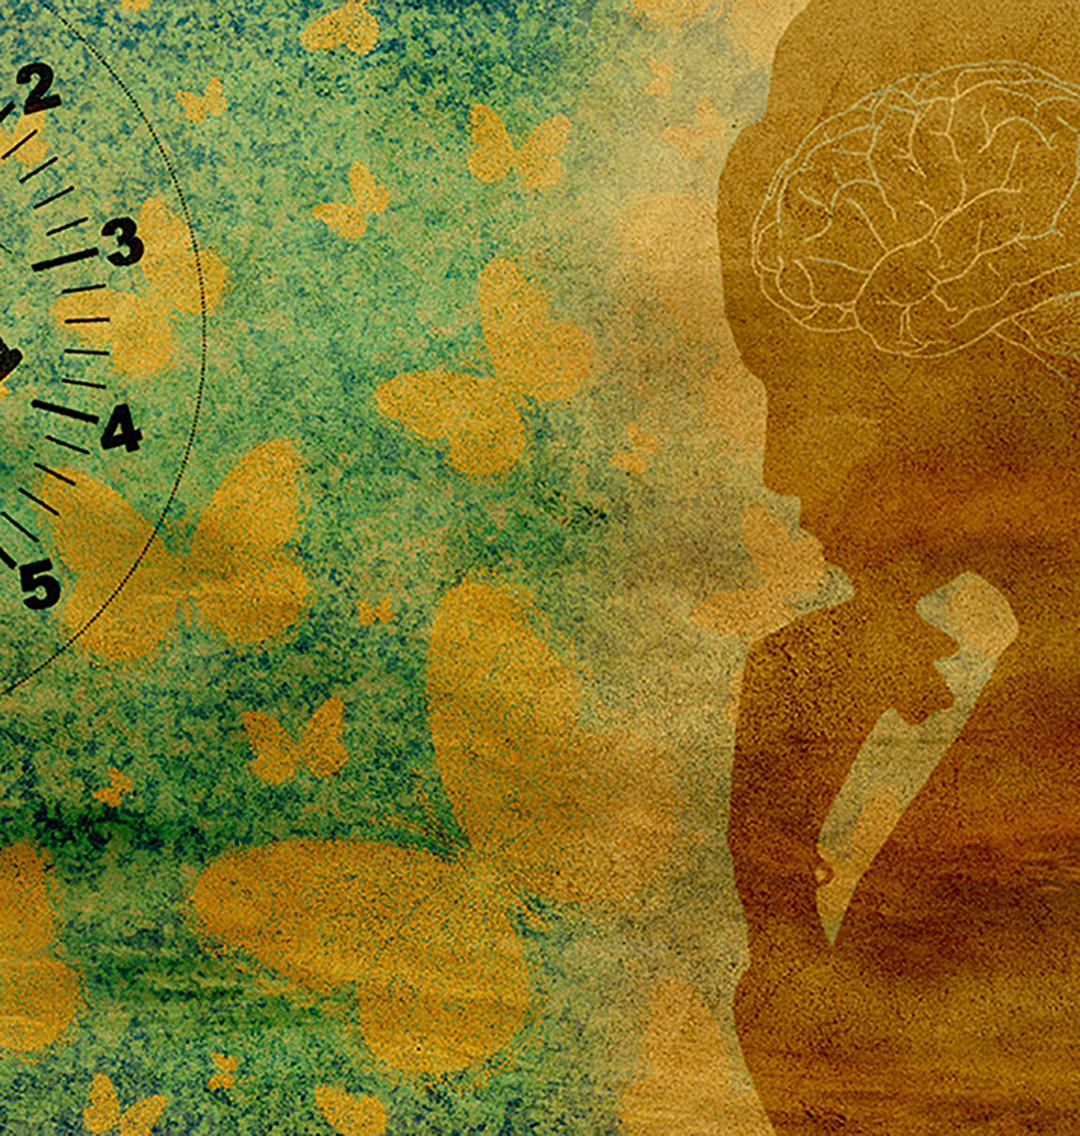 Artwork showing  the outline of a woman thinking in front of a clock icon. The background is green with yellow butterflies.